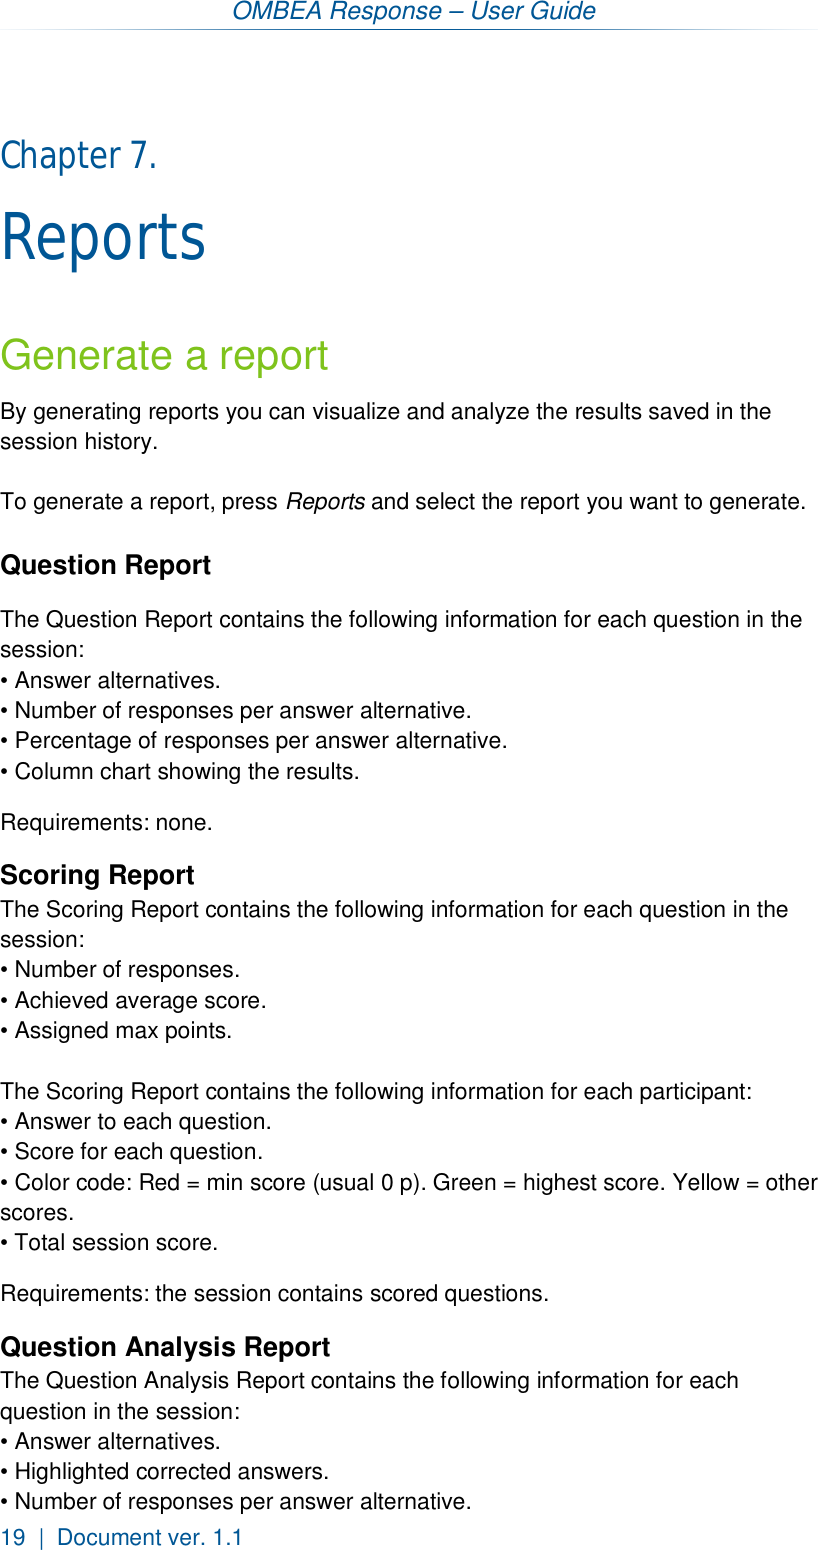 OMBEA Response – User Guide 19  |  Document ver. 1.1  Chapter 7.  Reports Generate a report By generating reports you can visualize and analyze the results saved in the session history.  To generate a report, press Reports and select the report you want to generate.  Question Report The Question Report contains the following information for each question in the session: • Answer alternatives. • Number of responses per answer alternative. • Percentage of responses per answer alternative. • Column chart showing the results.  Requirements: none. Scoring Report The Scoring Report contains the following information for each question in the session: • Number of responses. • Achieved average score. • Assigned max points.  The Scoring Report contains the following information for each participant: • Answer to each question. • Score for each question. • Color code: Red = min score (usual 0 p). Green = highest score. Yellow = other scores. • Total session score. Requirements: the session contains scored questions. Question Analysis Report The Question Analysis Report contains the following information for each question in the session: • Answer alternatives. • Highlighted corrected answers. • Number of responses per answer alternative. 